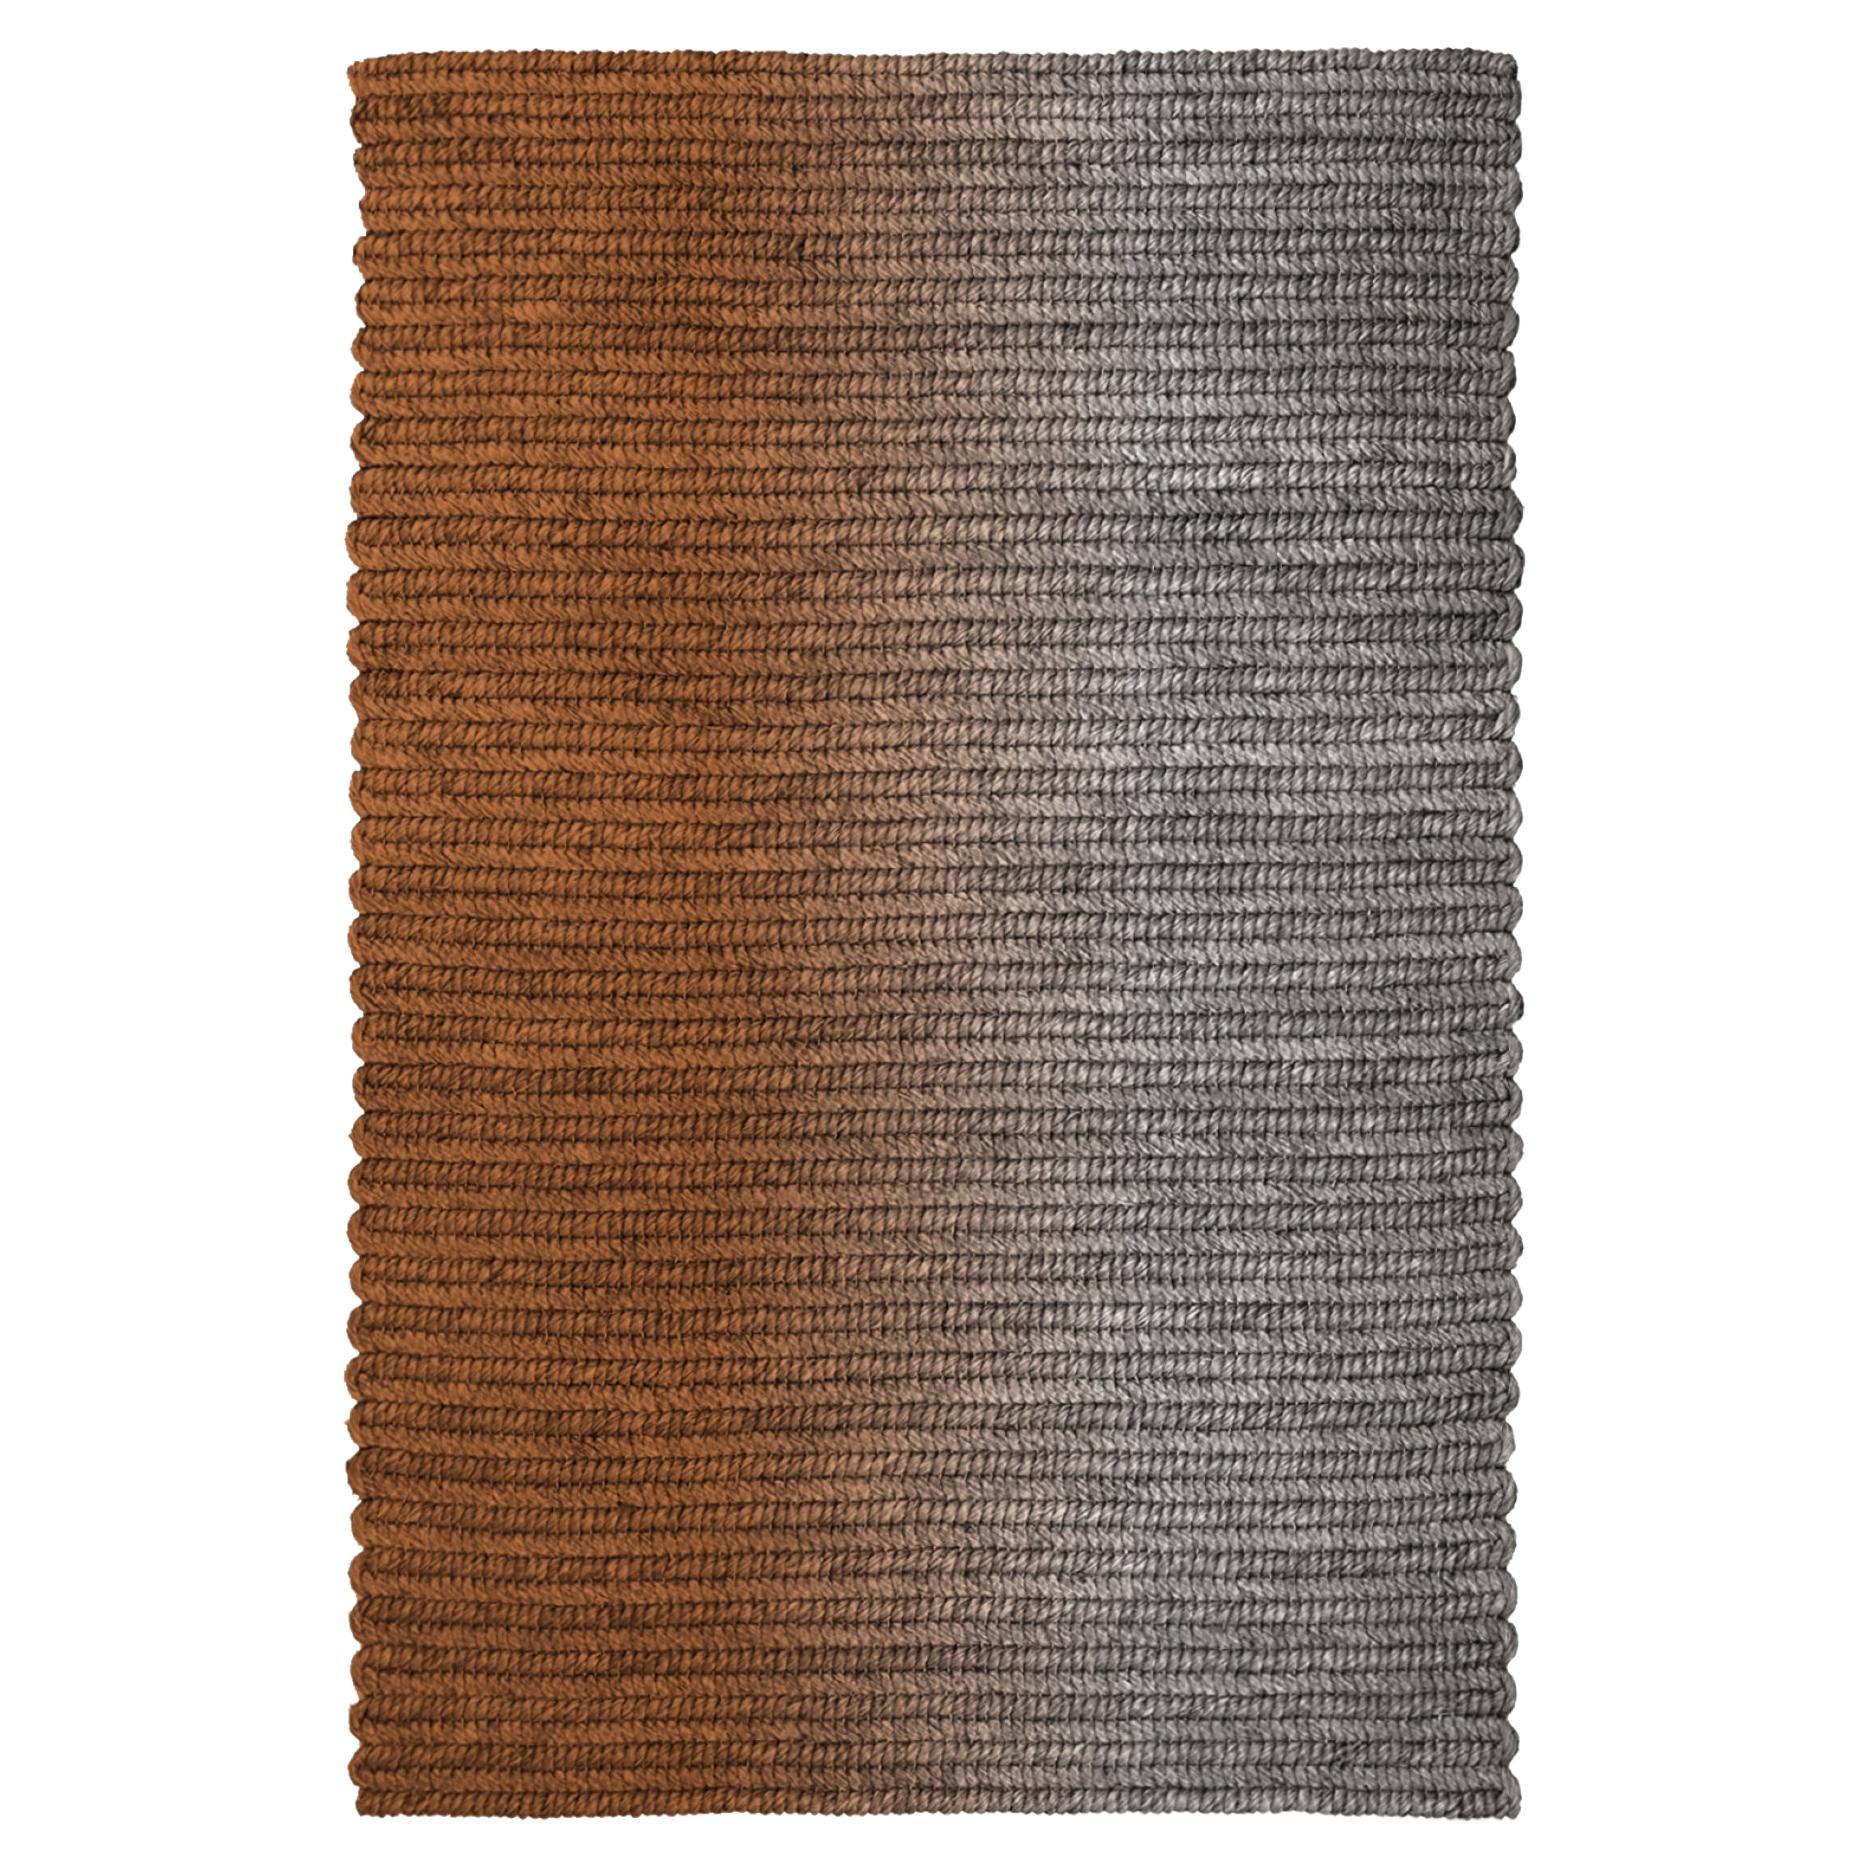 'Switch' Rug in Abaca, 'Mahogany' by Claire Vos for Musett Design For Sale